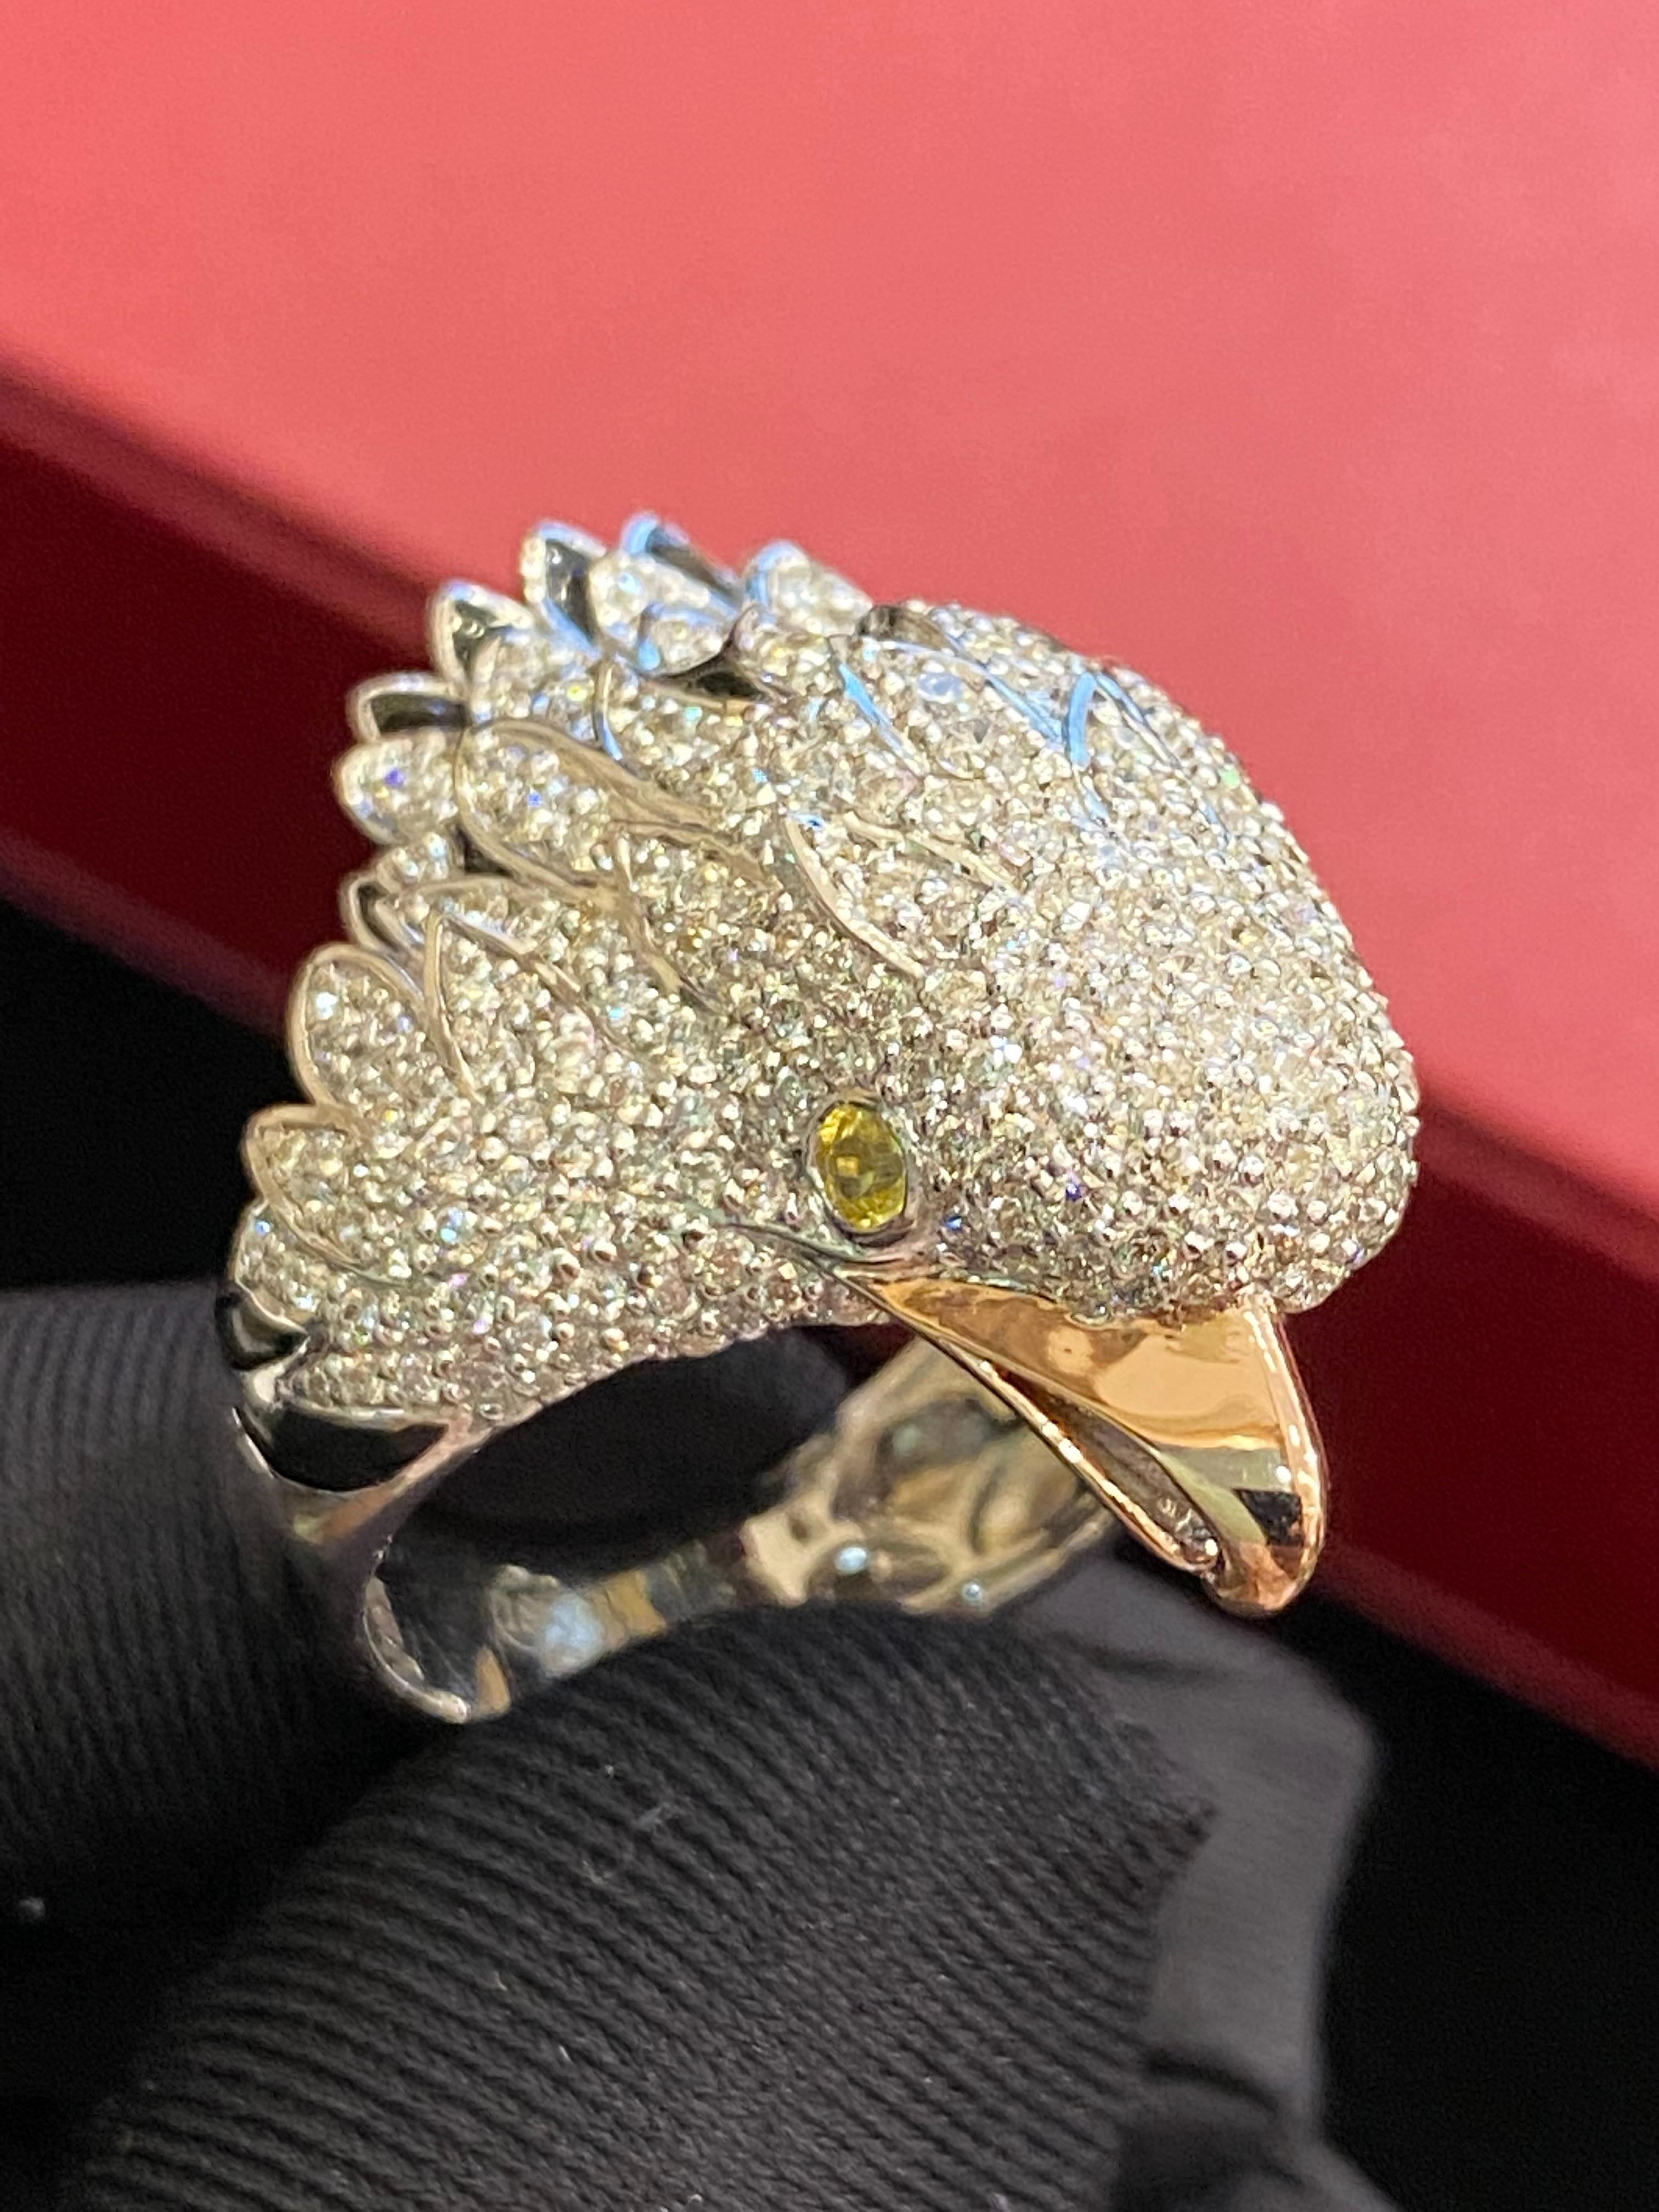 Elevate your style with this stunning Eagle-inspired ring, boasting 3.51 carats of brilliant F/VS1 natural diamonds and 0.20 carats of vibrant yellow sapphire set in luxurious 18K white gold. With its captivating design, this ring ensures you'll be